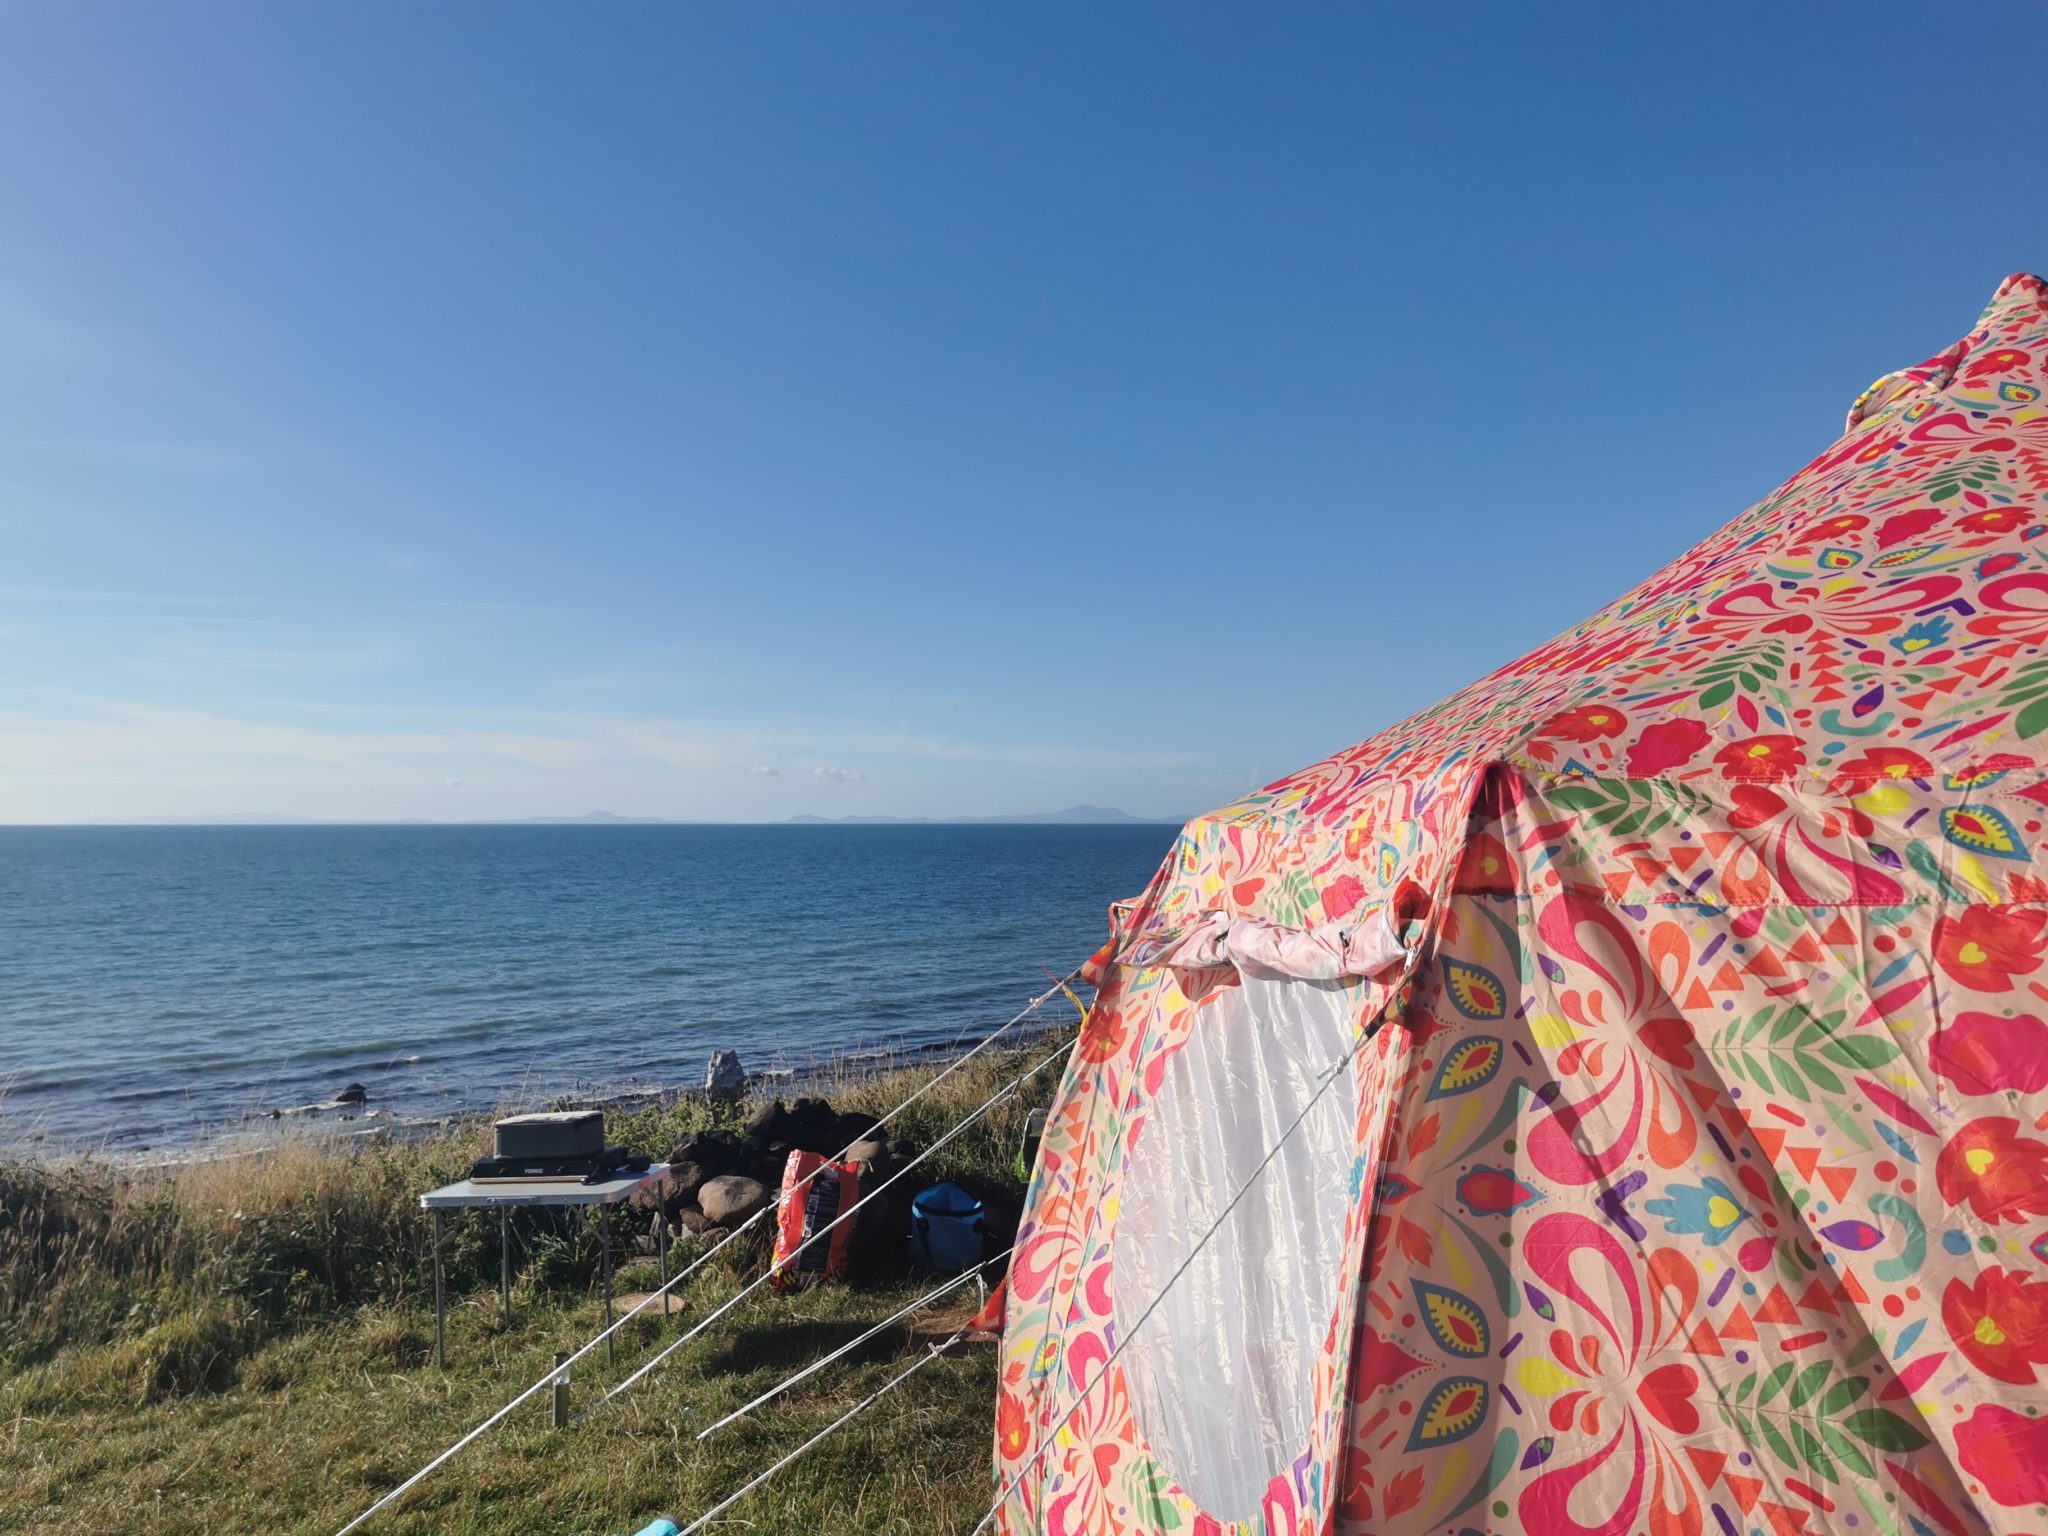 CAMPING 6 of The Most Popular Camping Trends From Summer 2022